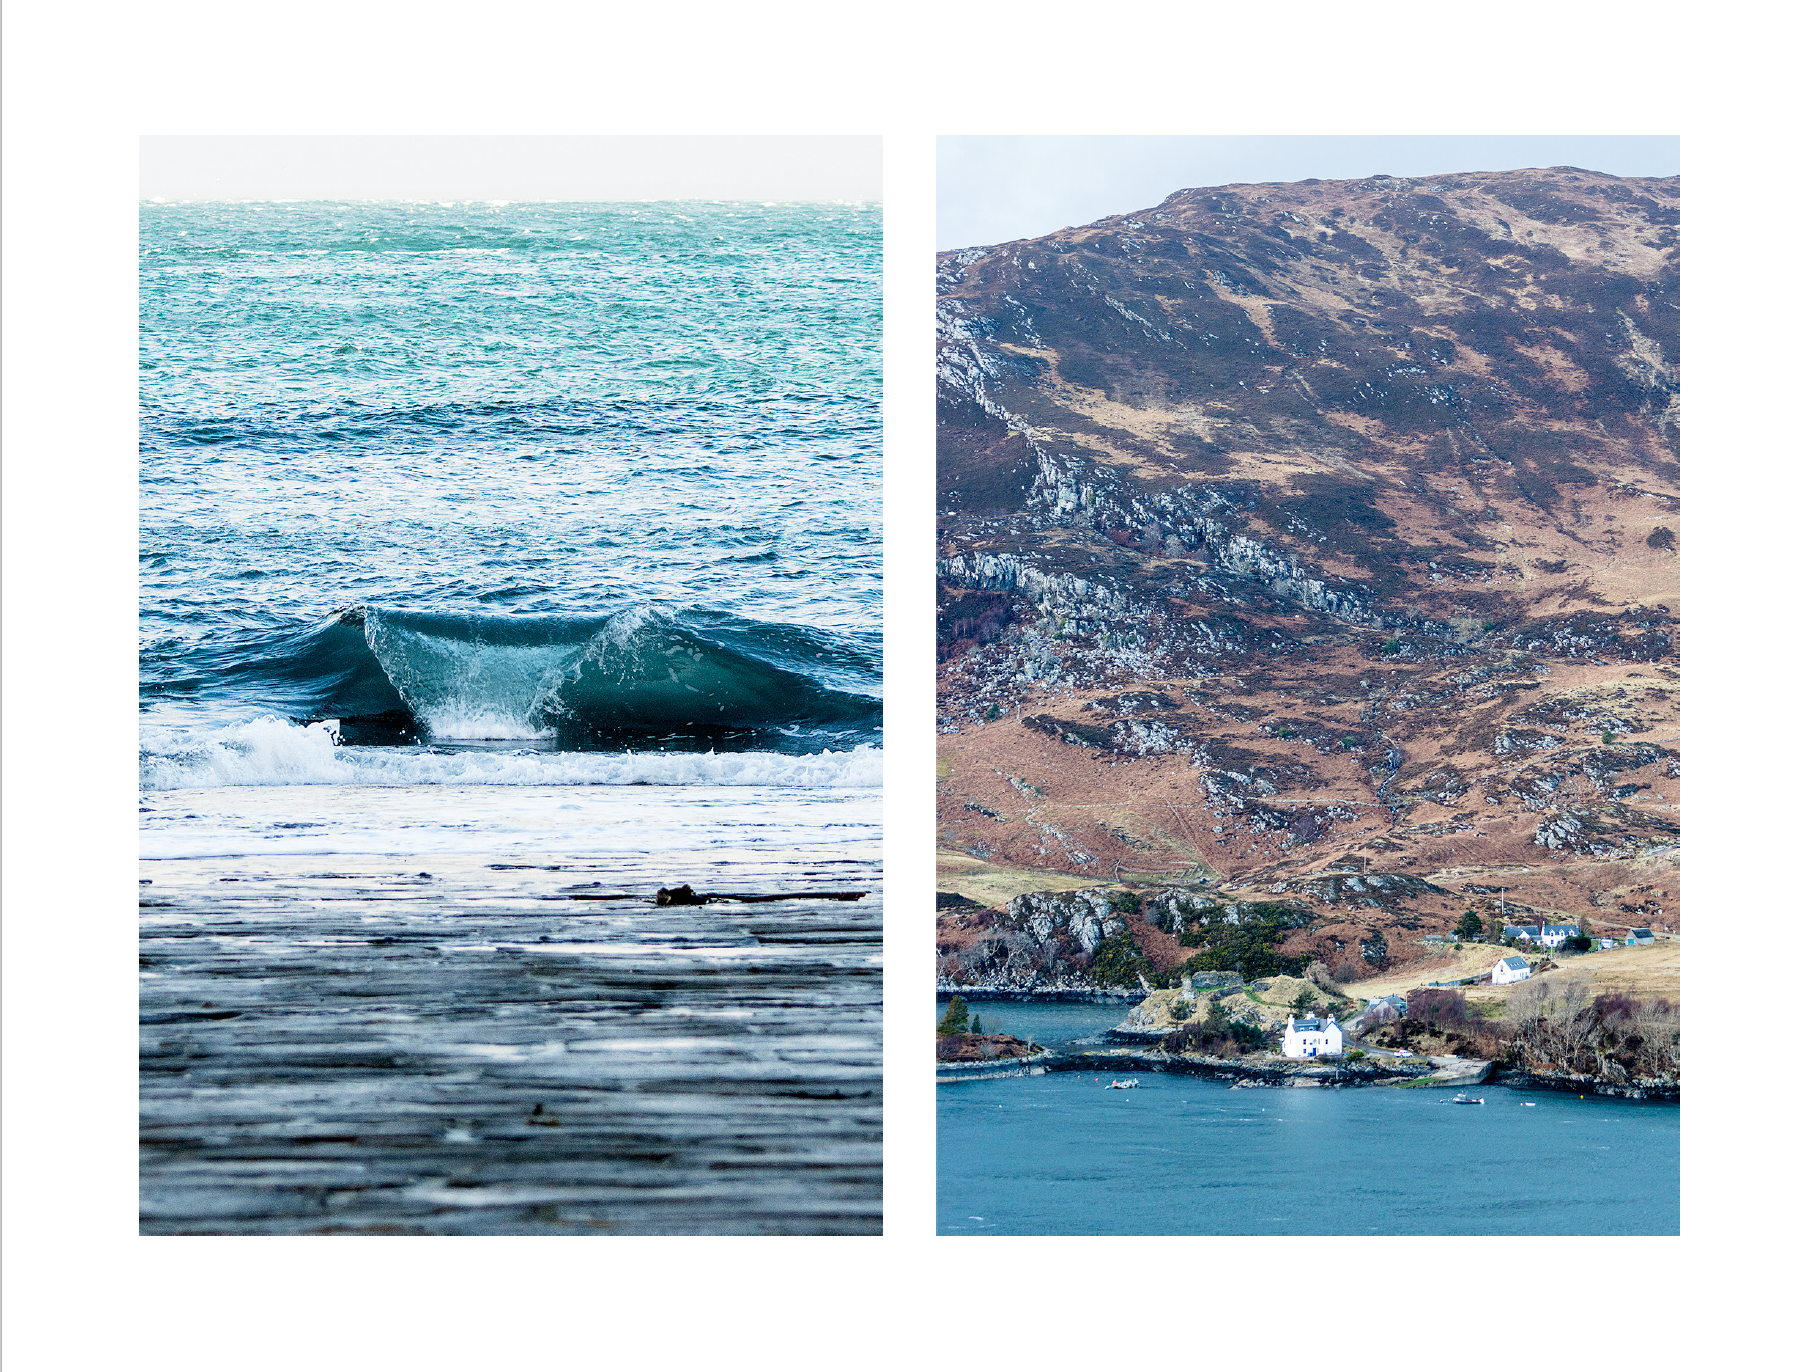 Alba- A photo book by Mark McInnis- Left photo is a wave barreling. Right photo is a hillside with a house at the bottom of the hill. 